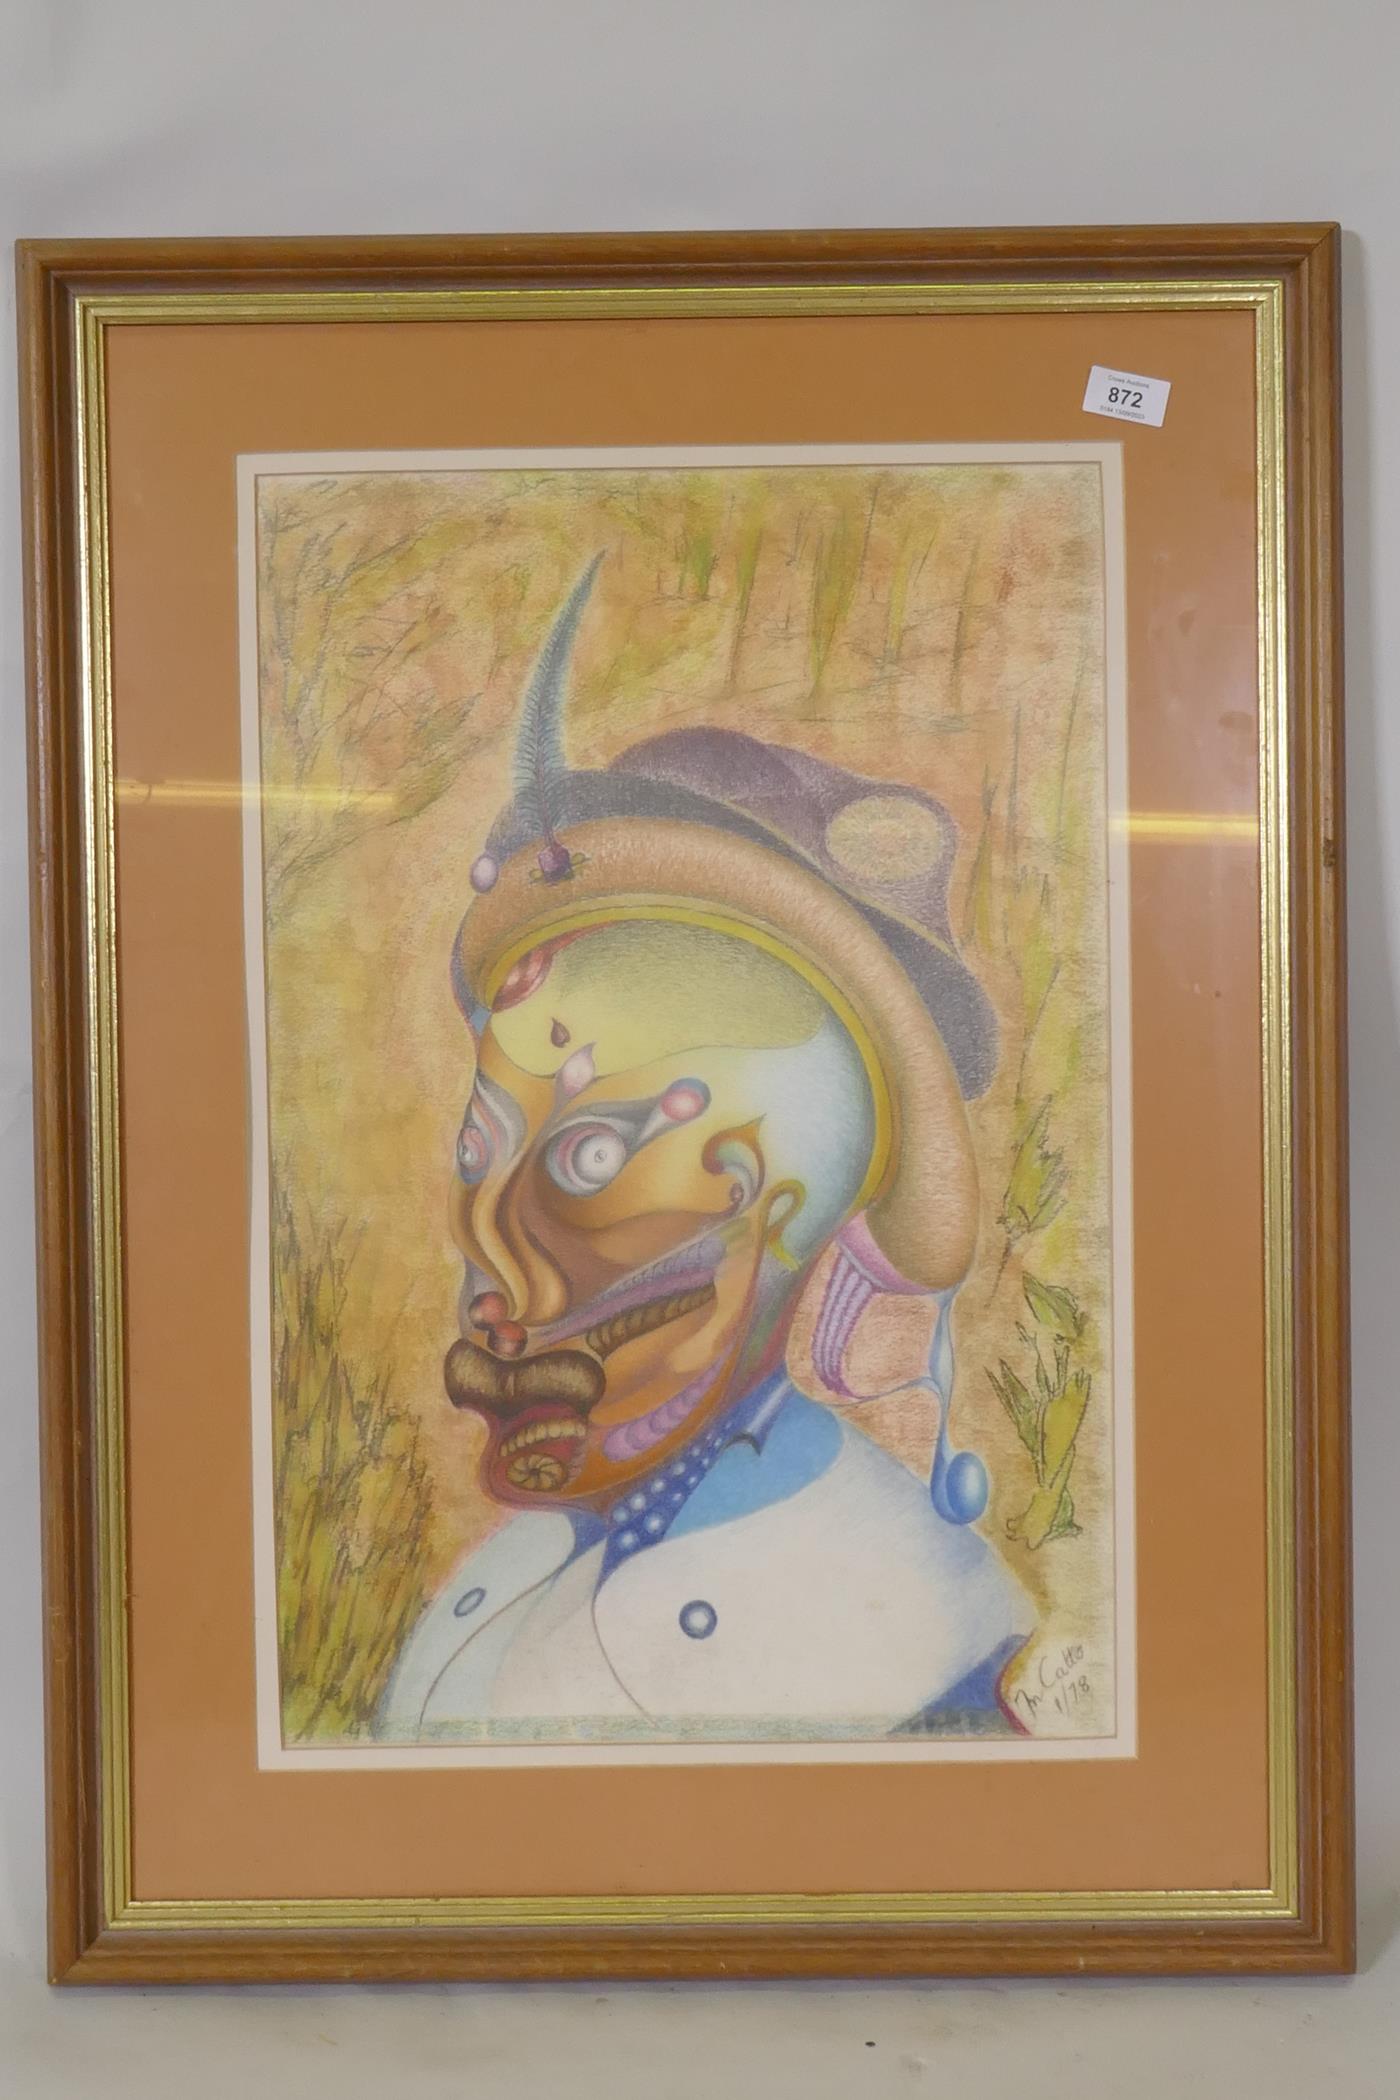 Abstract study, figure wearing a hat, lithograph, signed Fn ? Catto, 1/78, 40 x 60cm - Image 2 of 3